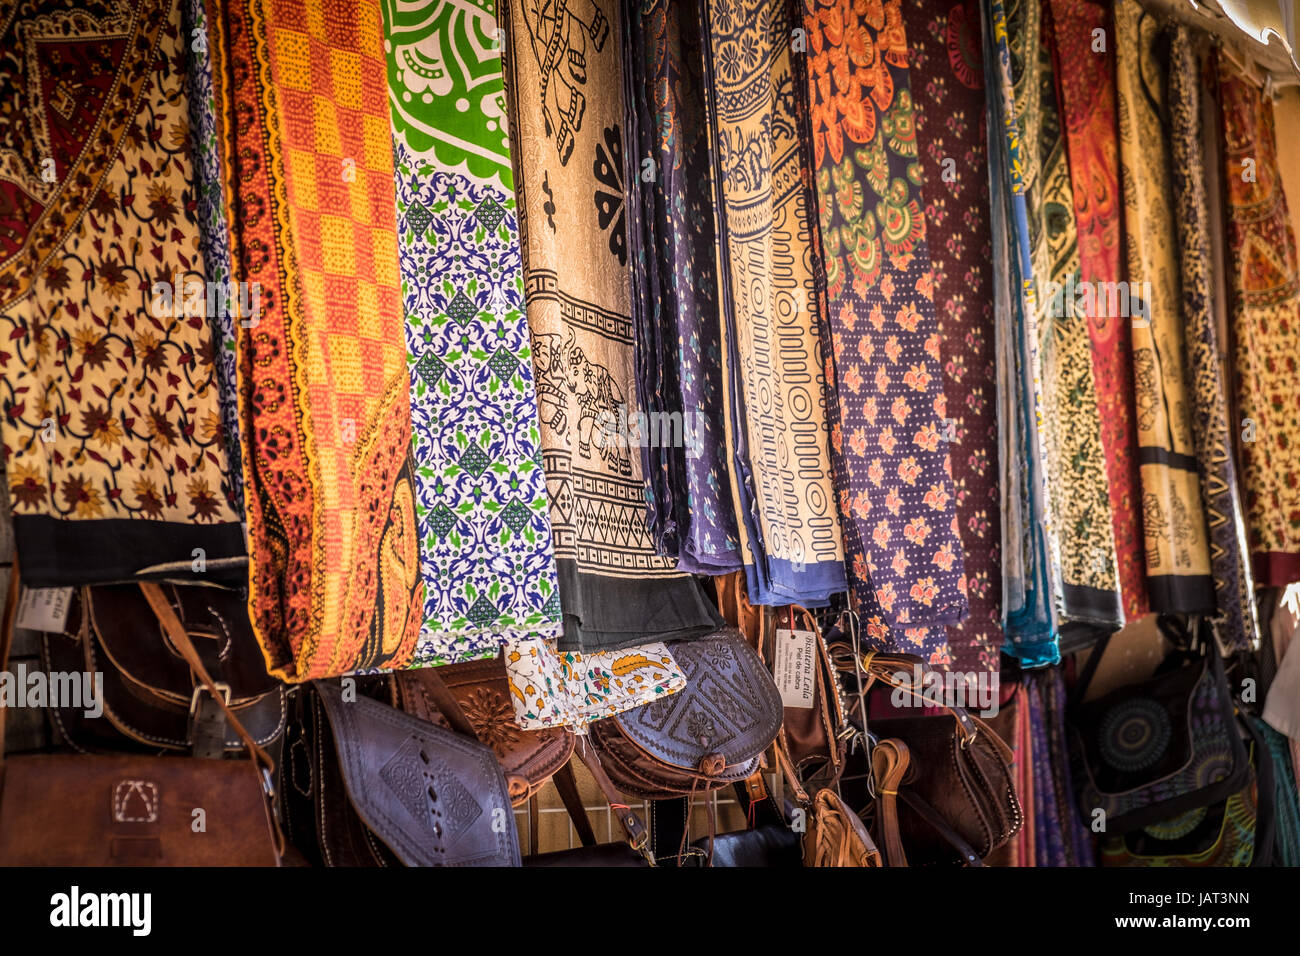 Fabrics & leather bags on display in a street market, Granada, Spain Stock Photo